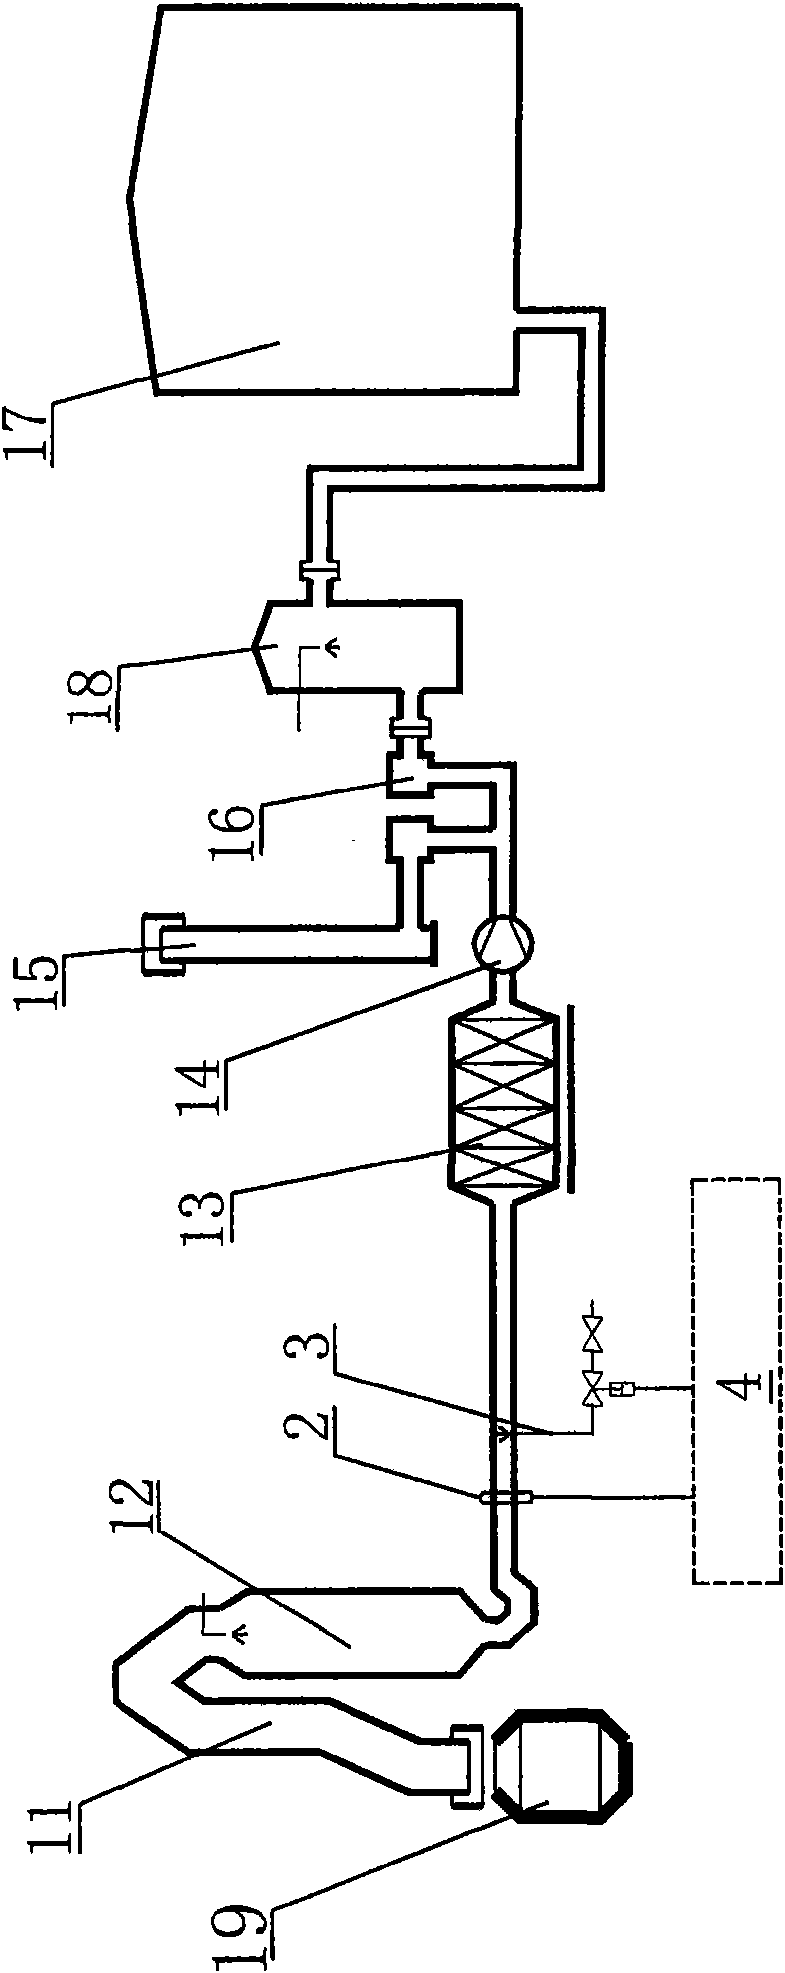 Dry converter coal gas dust-removal system and explosion protection device thereof